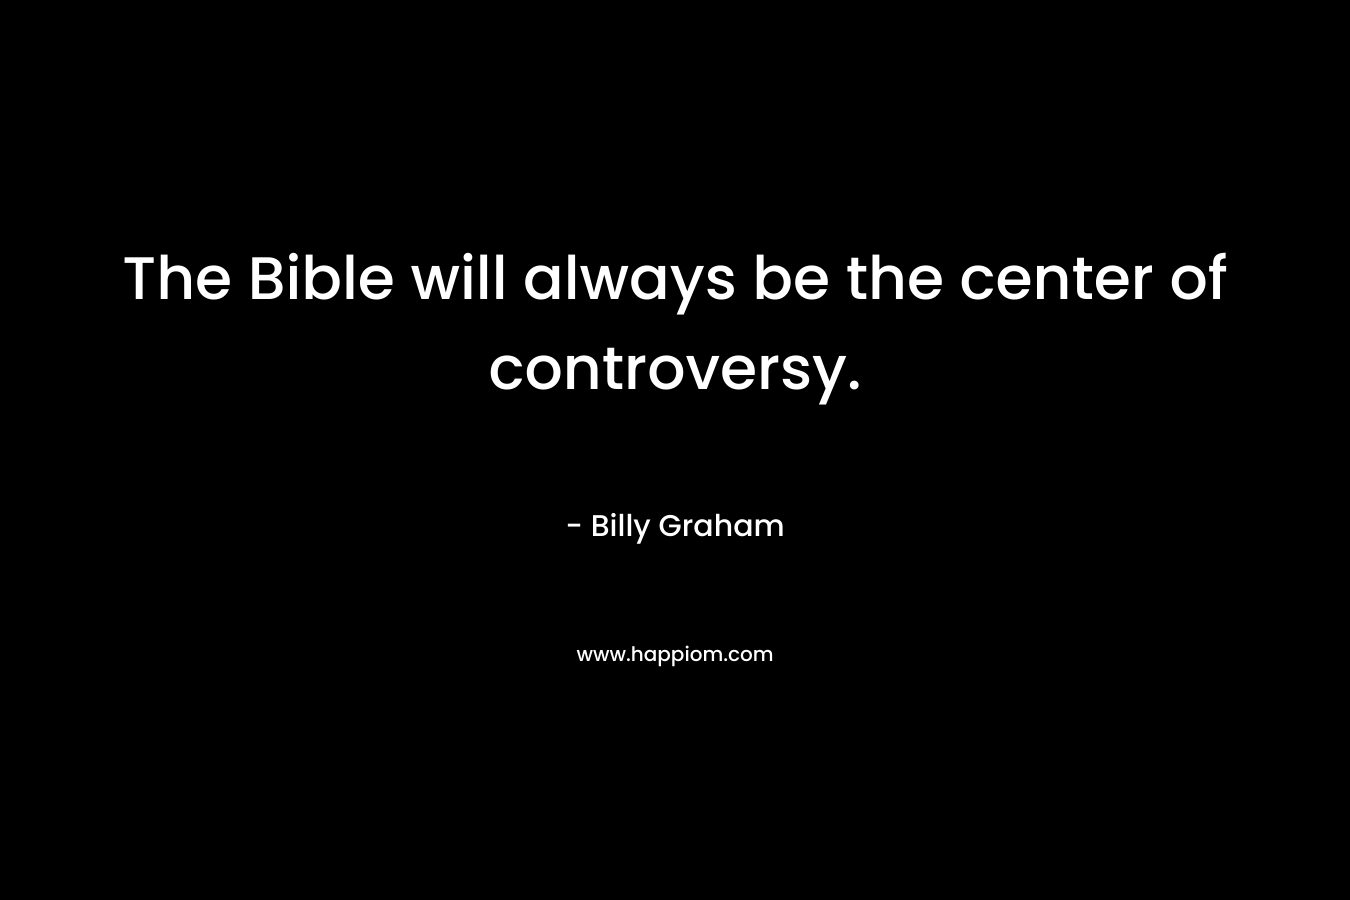 The Bible will always be the center of controversy. – Billy Graham